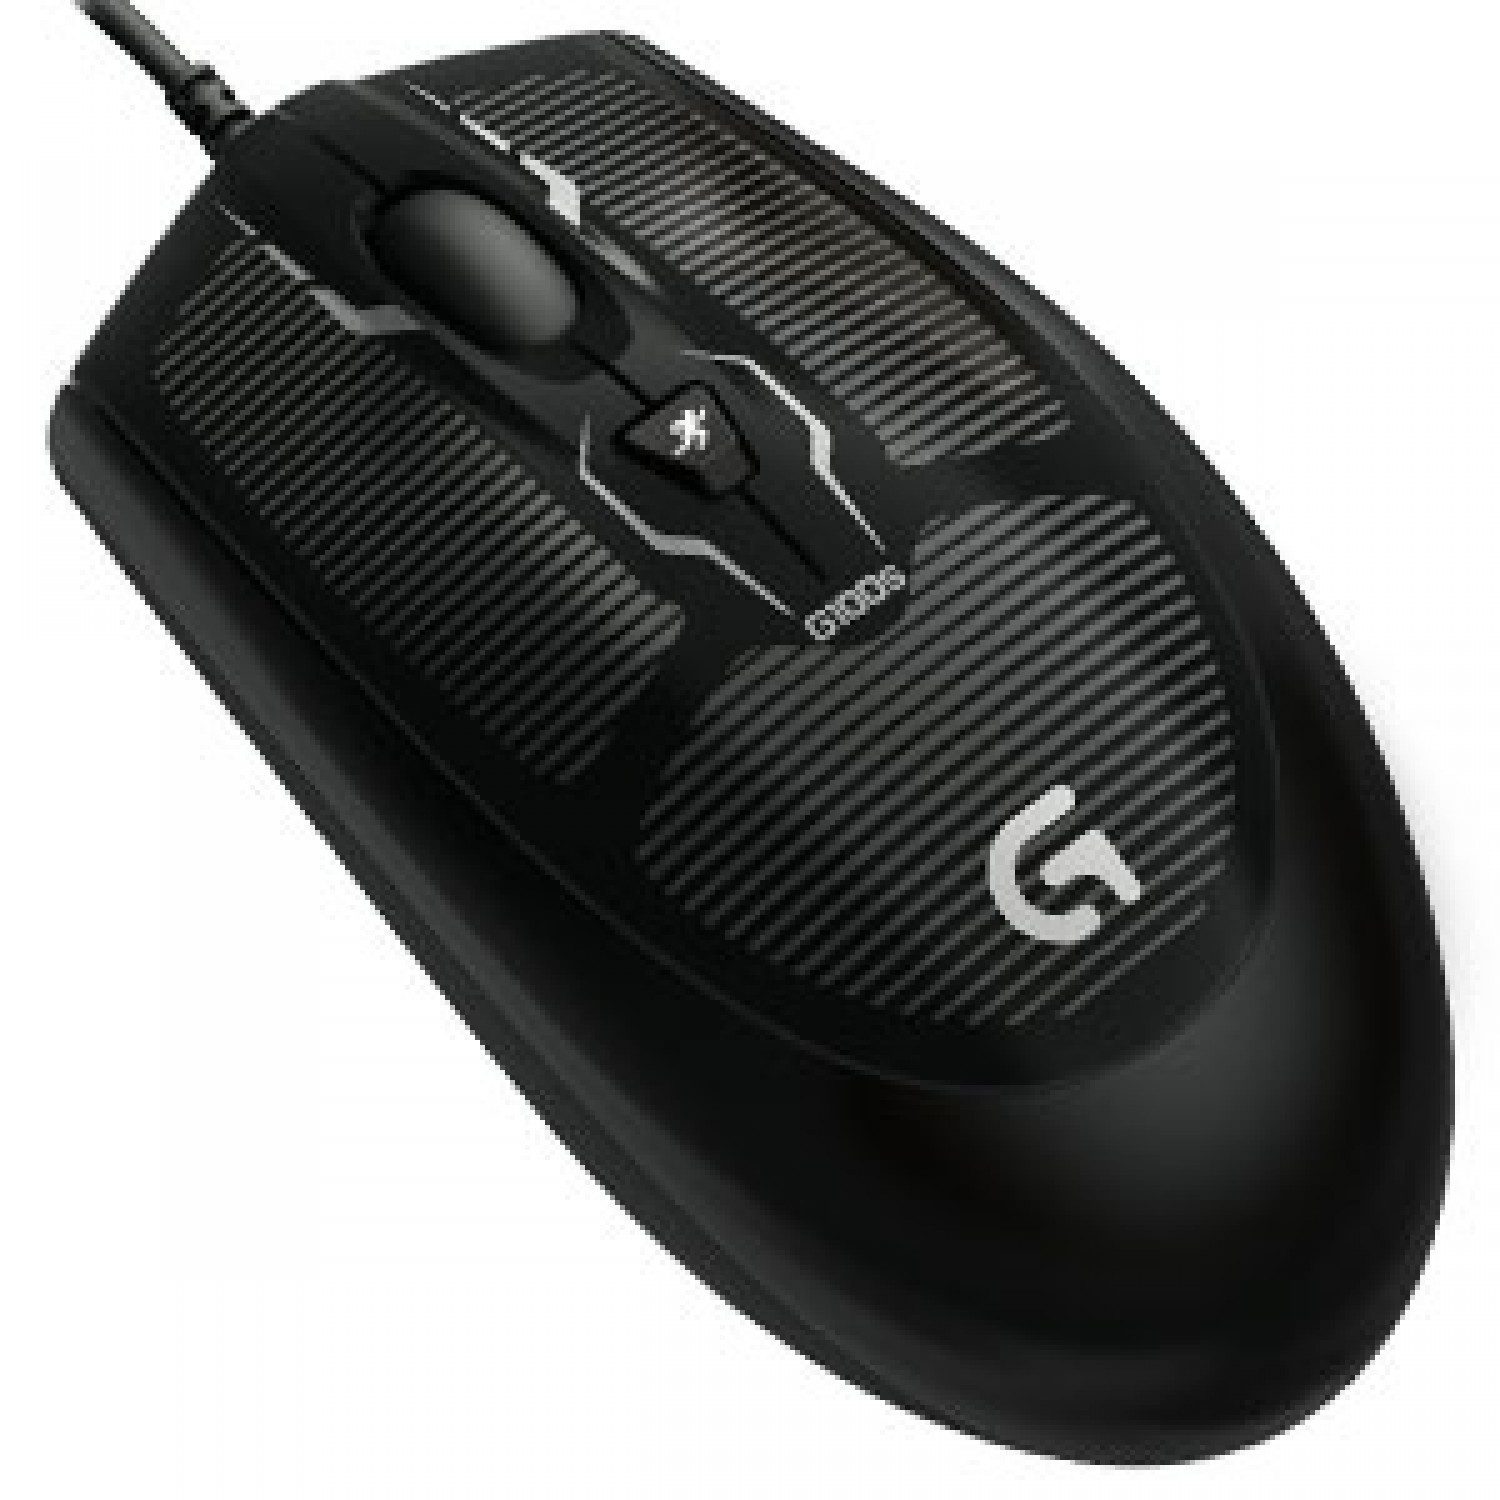 Logitech G100s Gaming Mouse